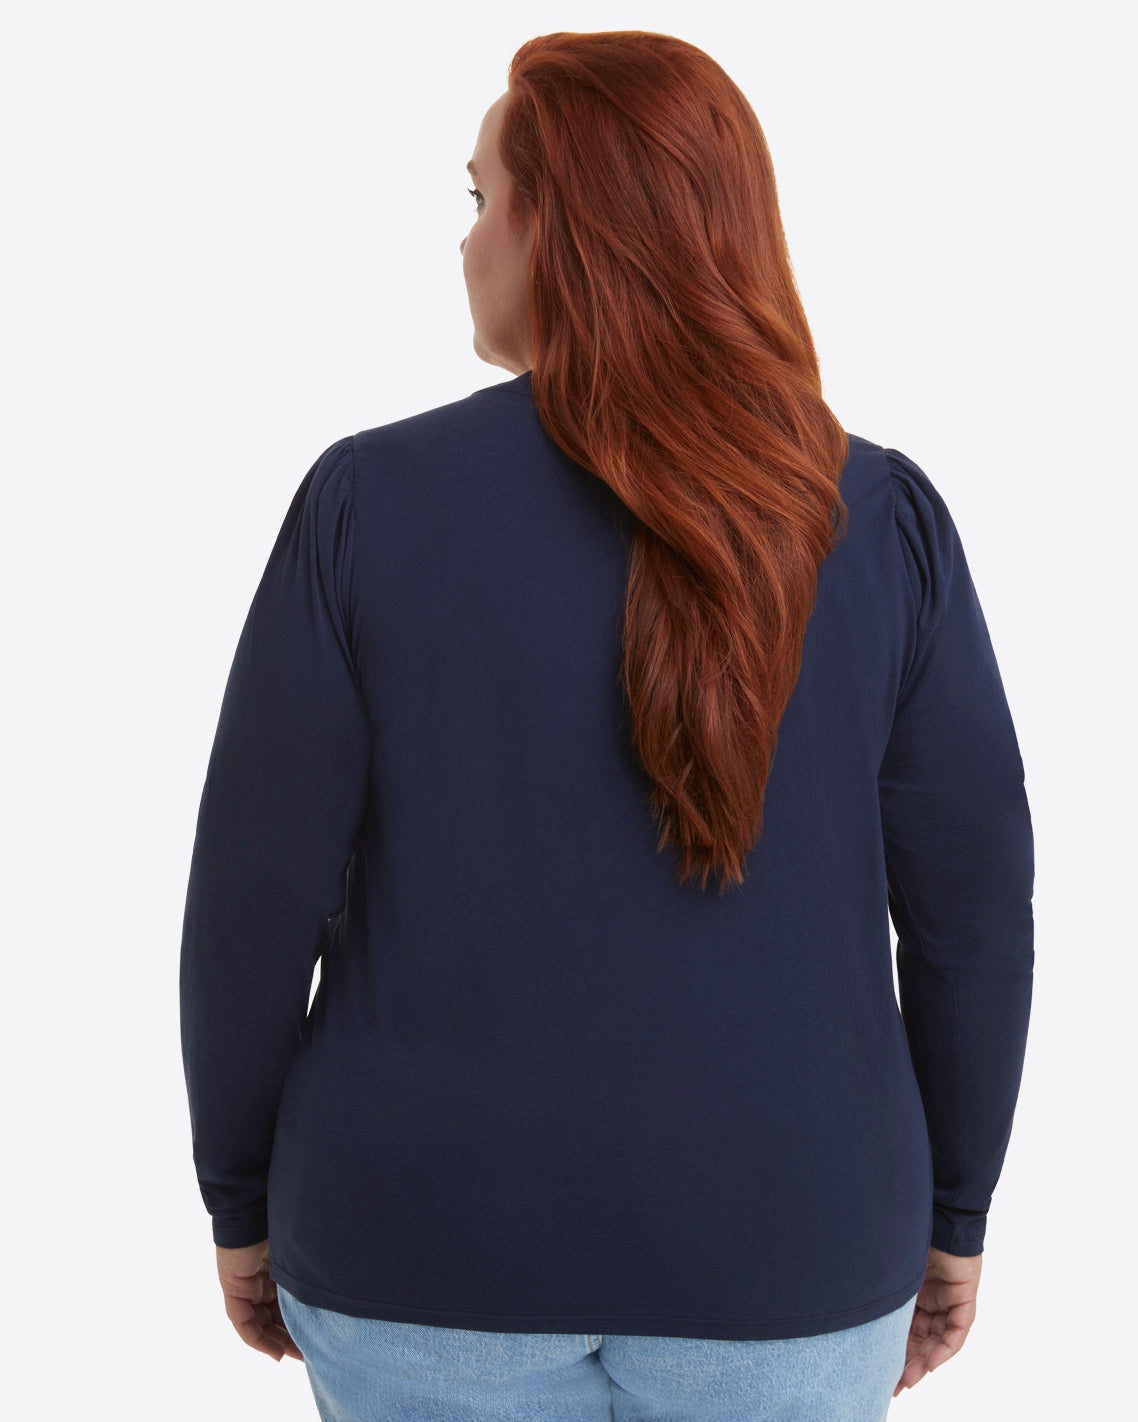 Long-Sleeve Easy Knit Top in Navy